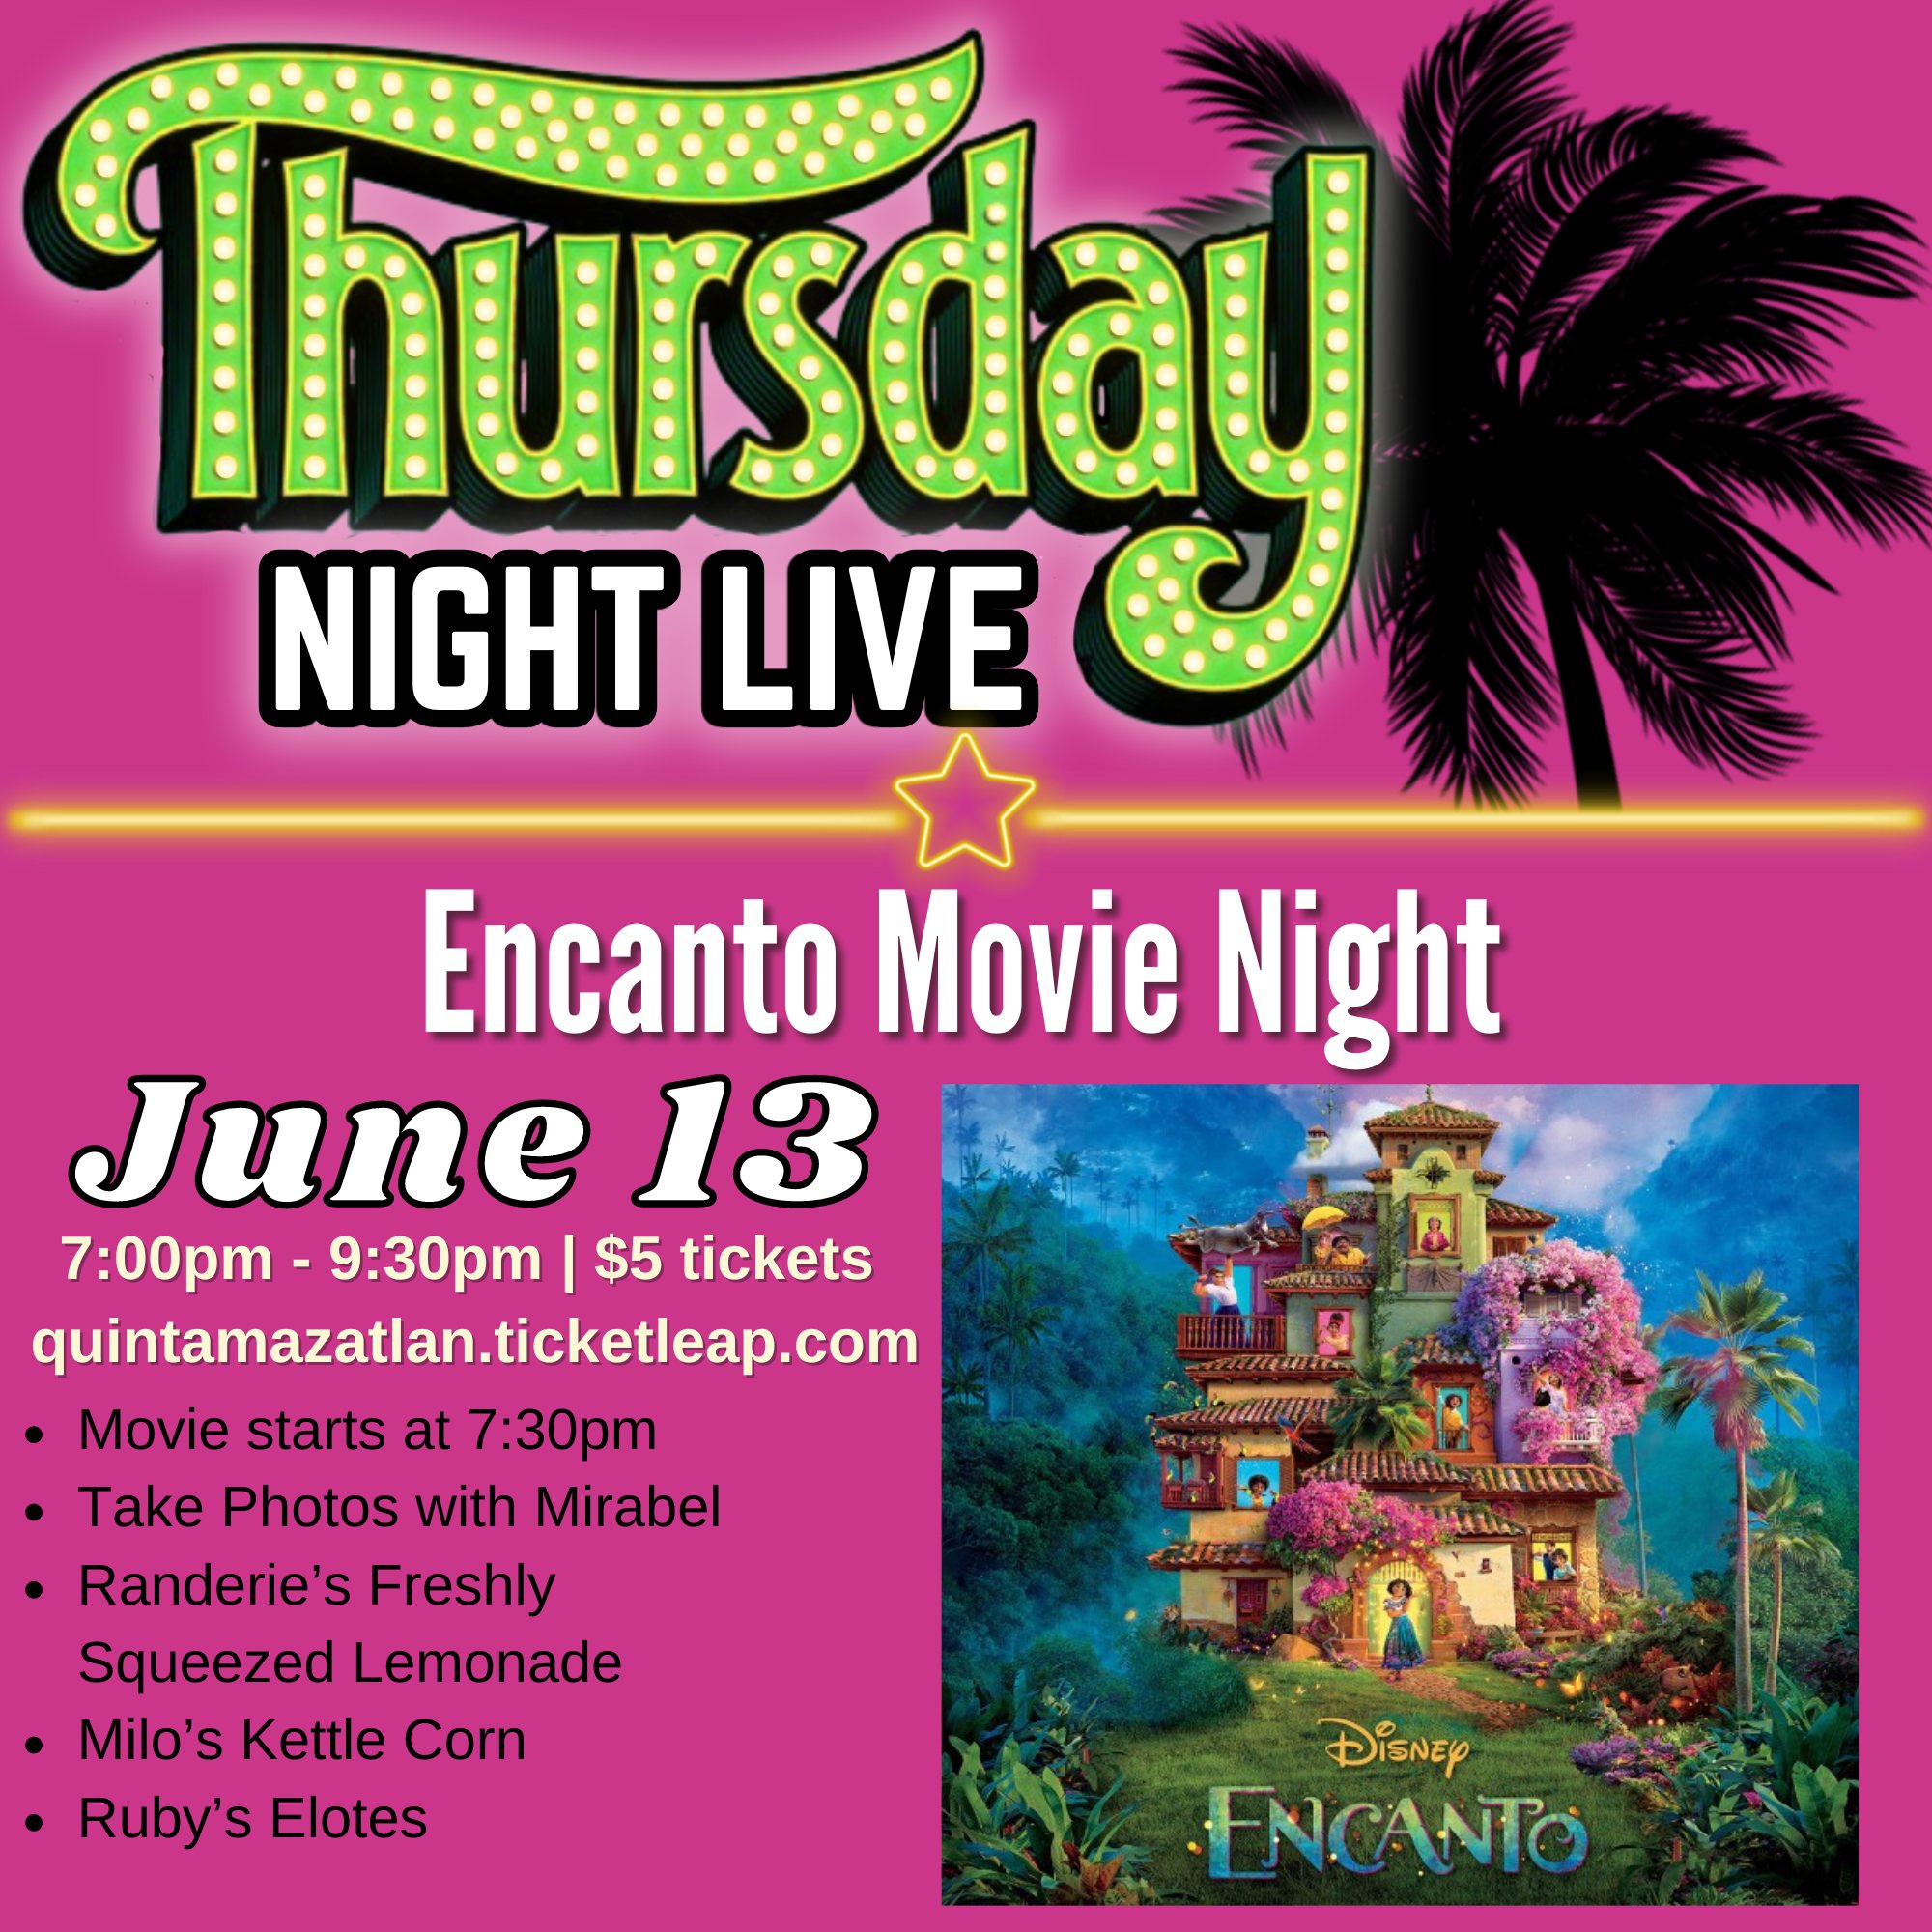 Experience Encanto Under the Stars!